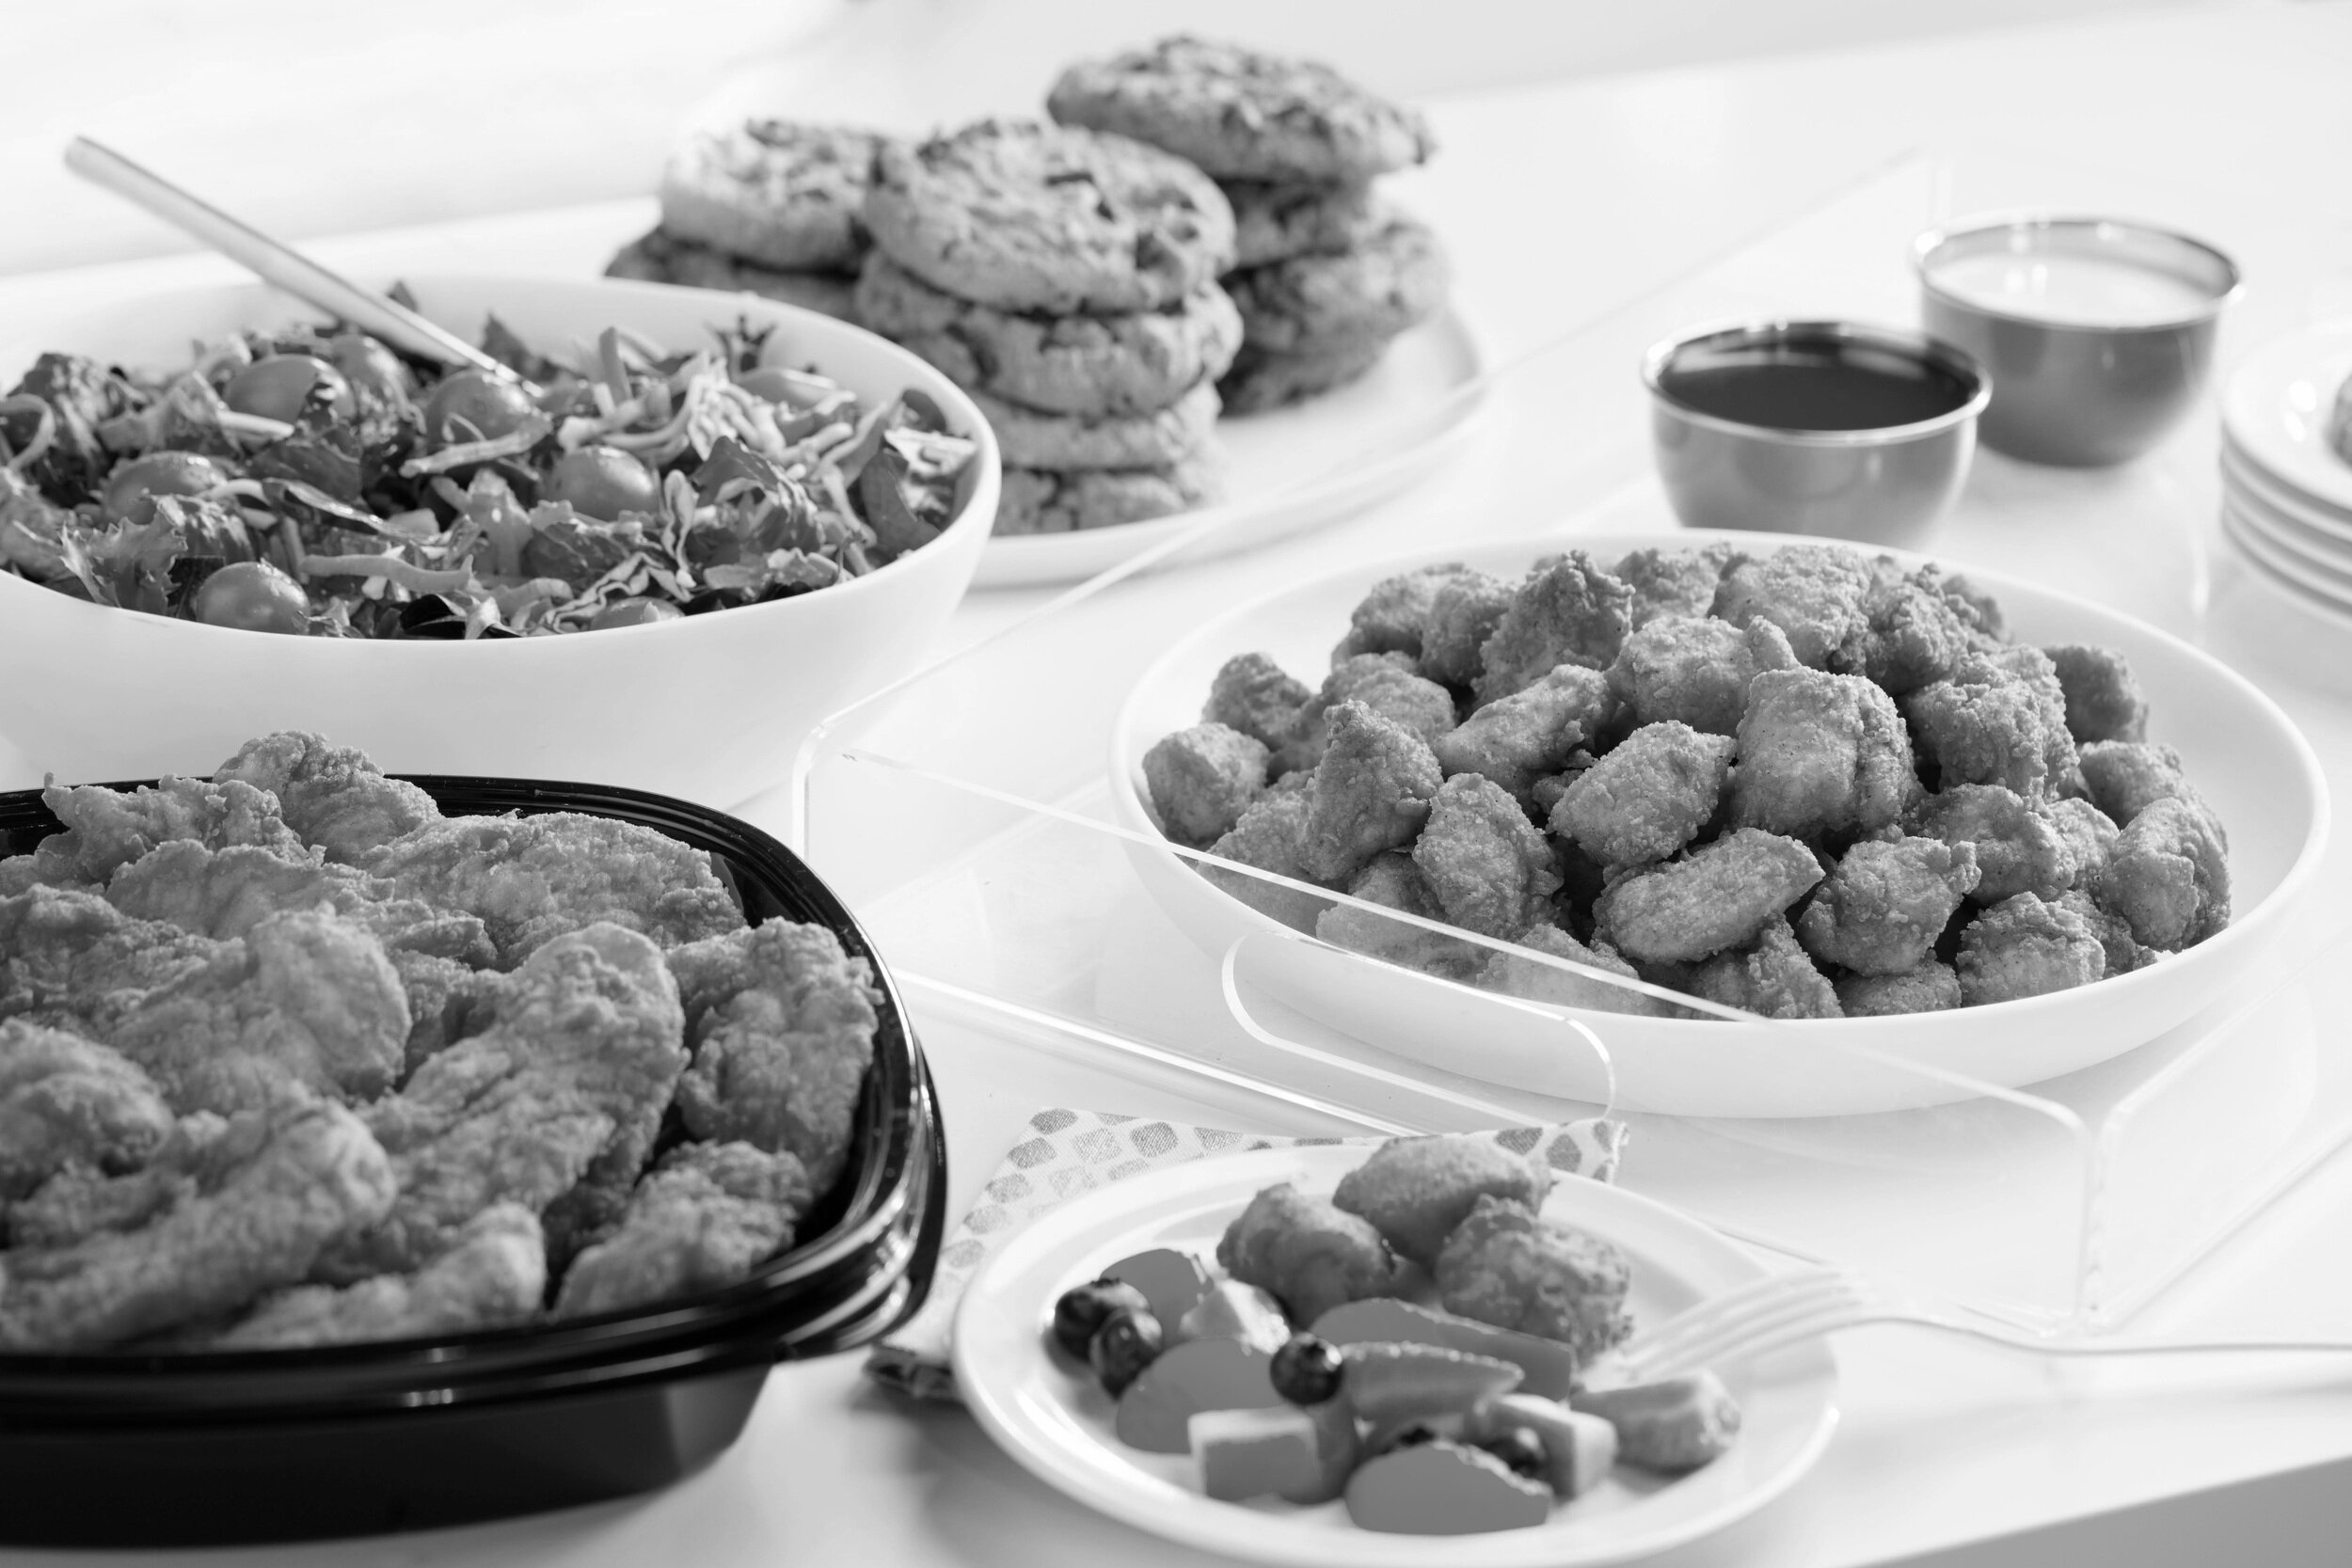 Chick-fil-a catering nuggets, strips and cookies